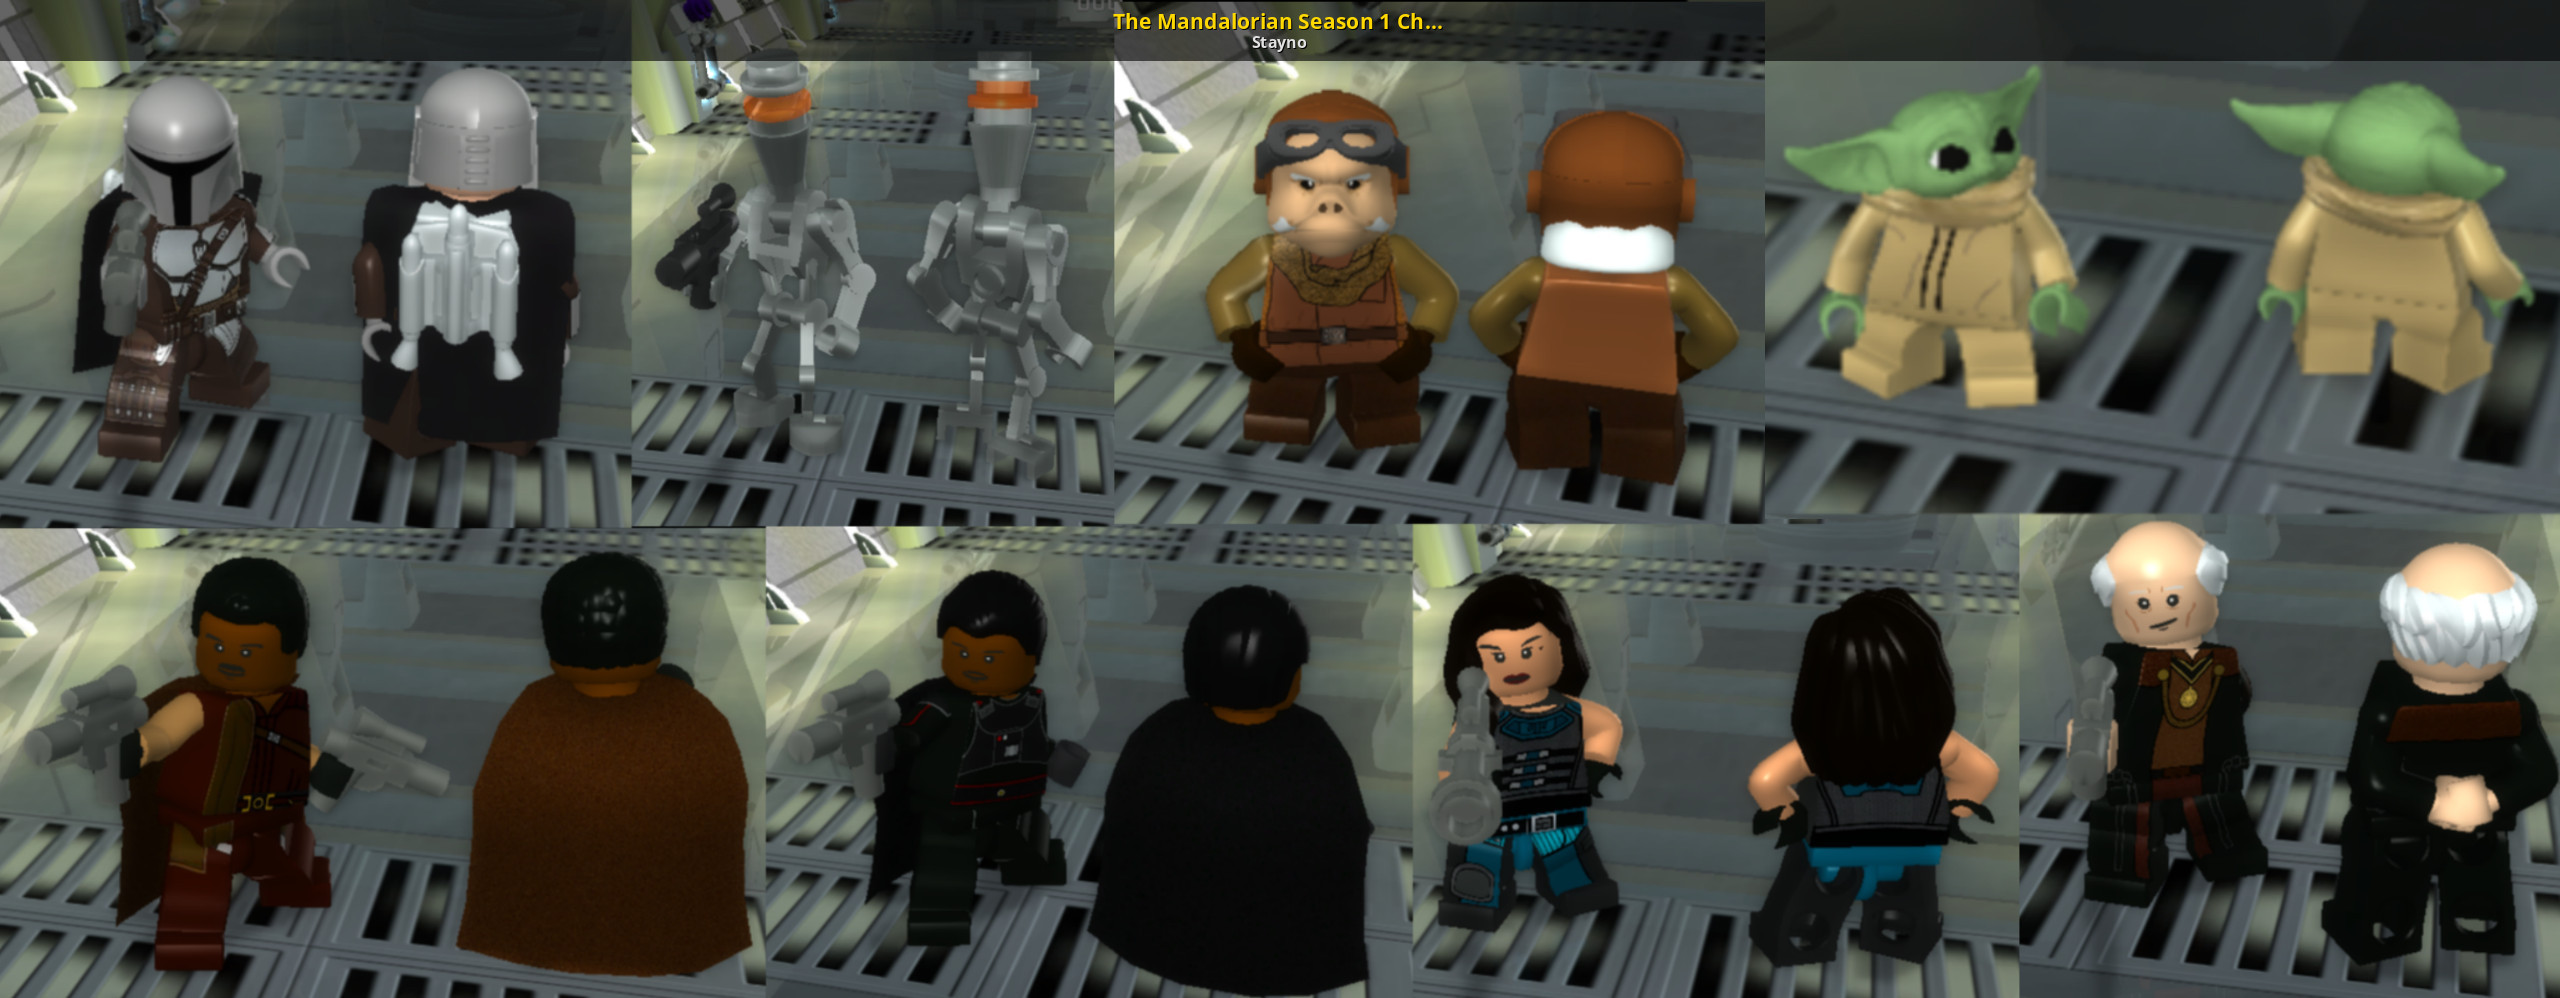 A LEGO Star Wars: The Complete Saga (LSW:TCS) Mod in the Character Packs ca...